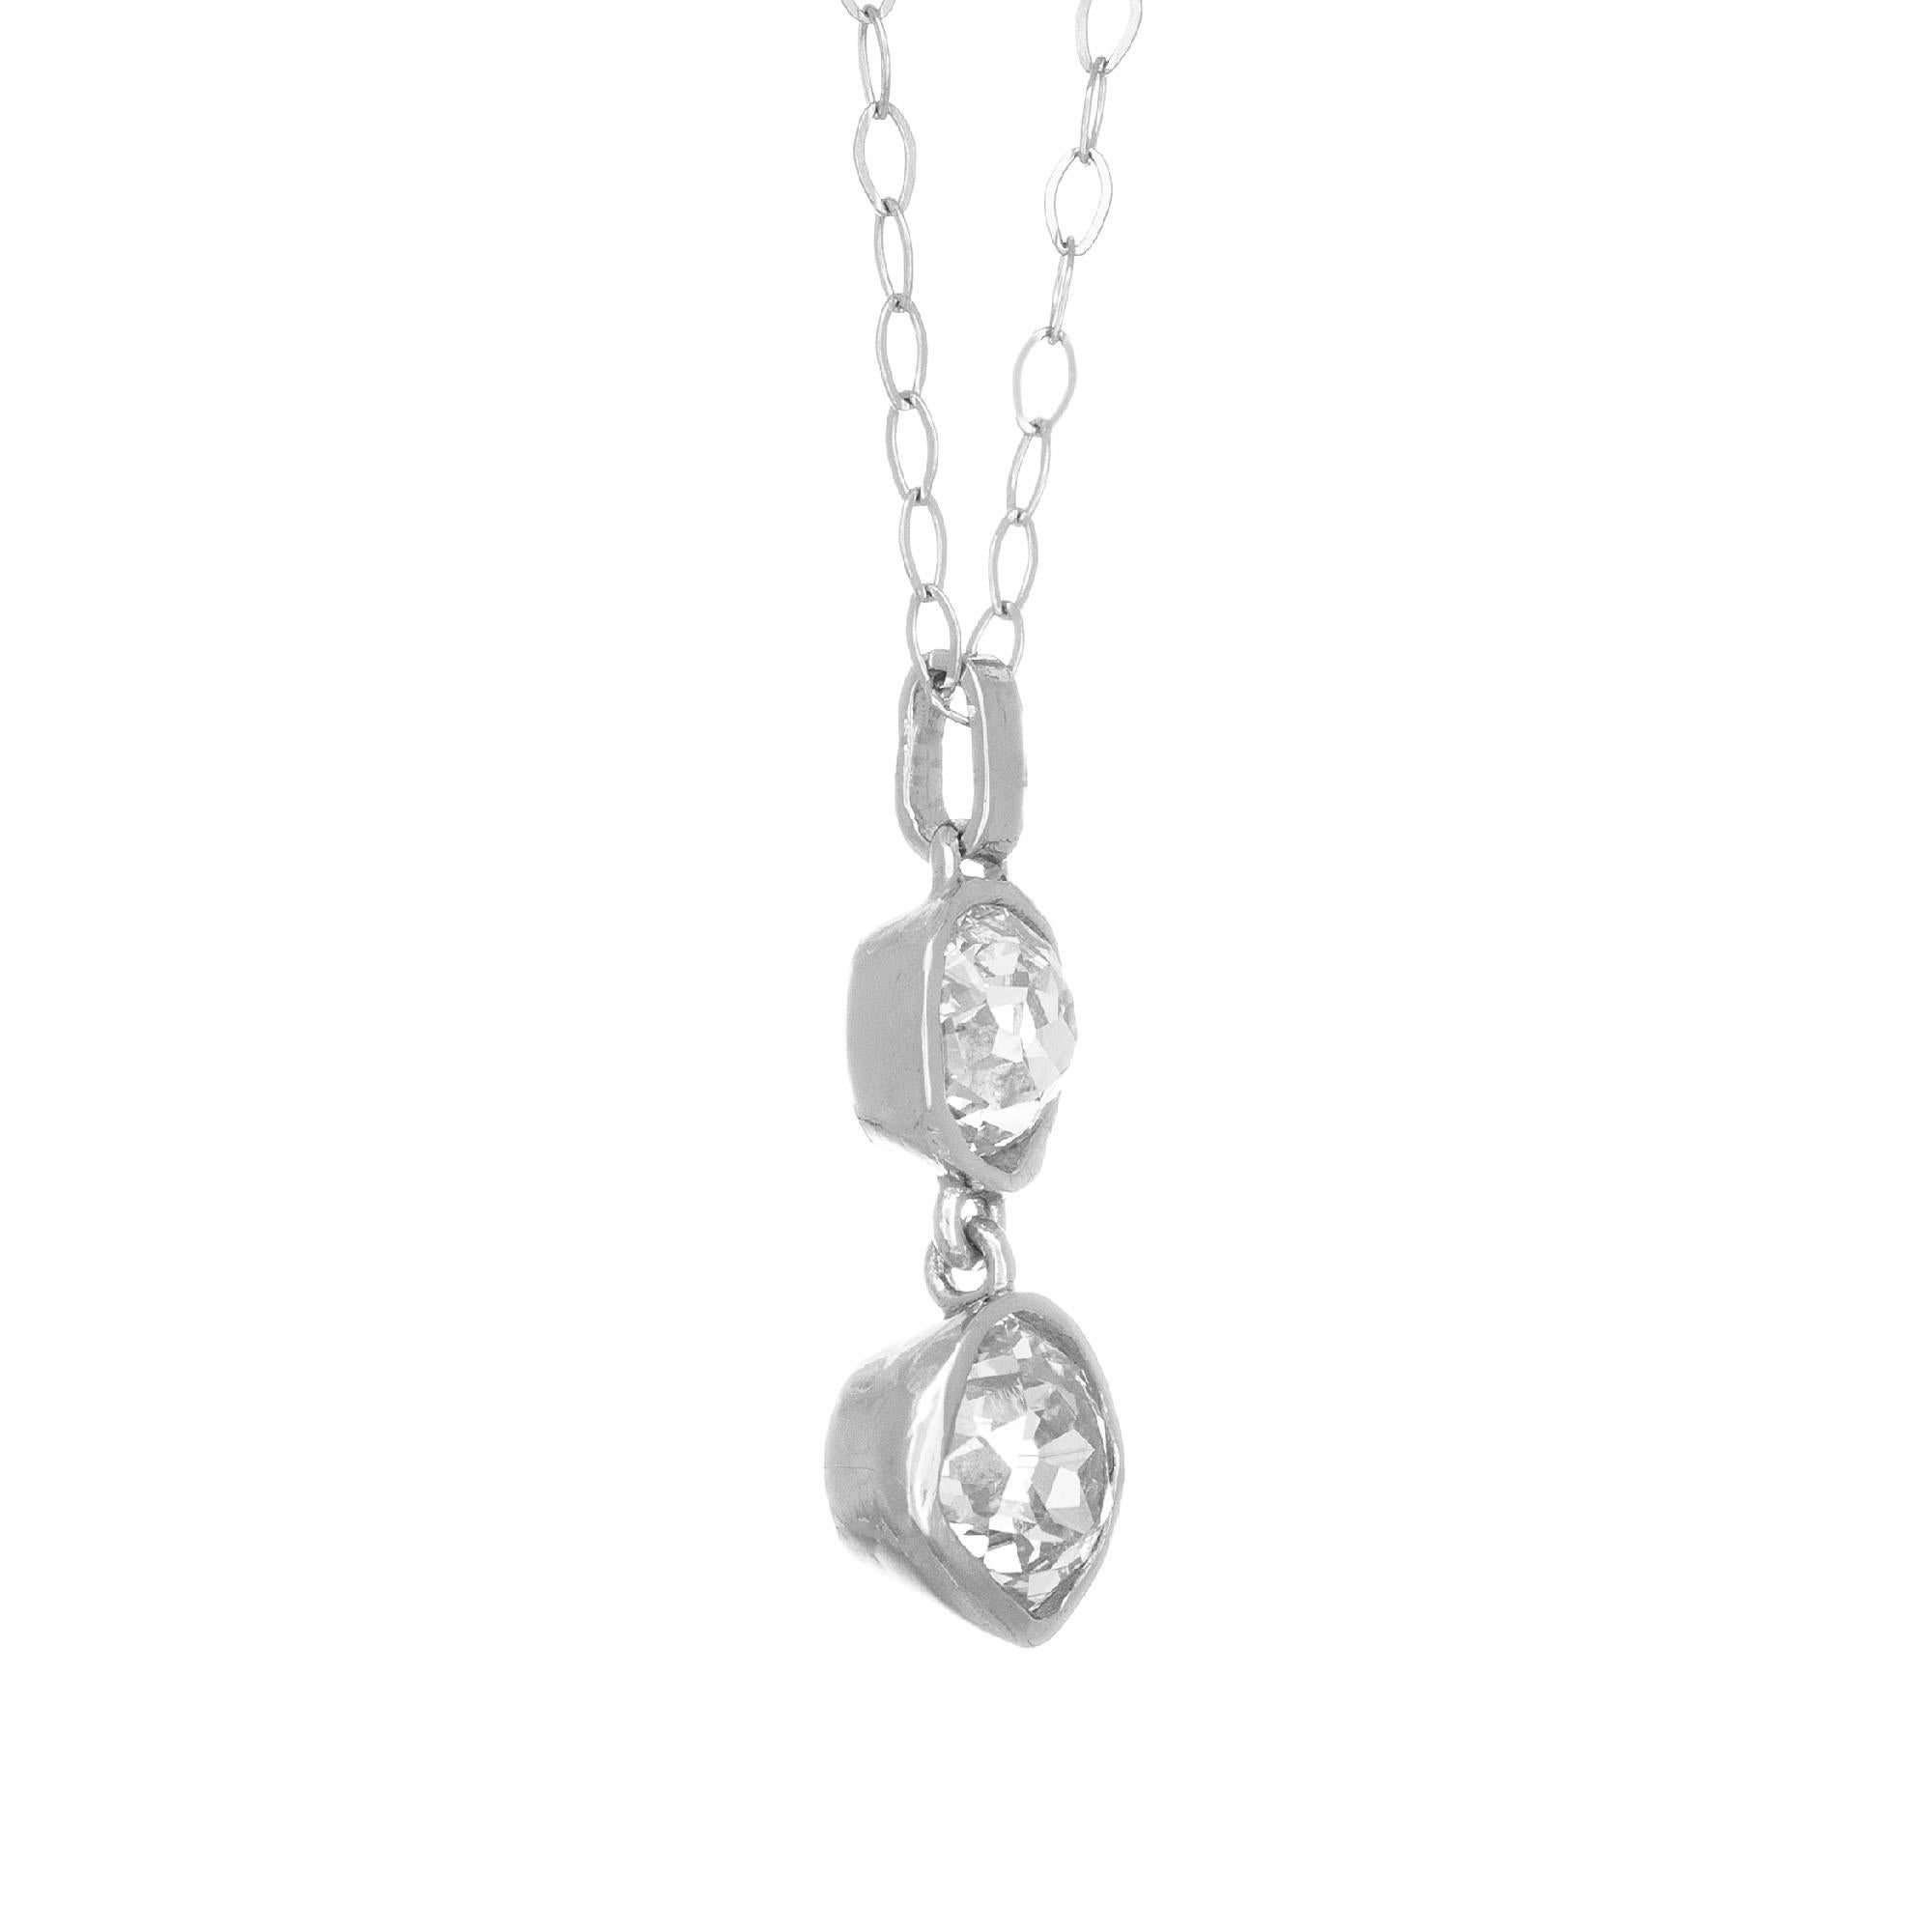 Odd shaped oval and cushion old mine cut diamond set into a classic dangle pendant in handmade 
platinum bezel from the Peter Suchy workshop.

1 old mine cut diamond I-J VS, approx. .37cts
1 old mine cut diamond L-M SI, approx. .63ct
Platinum